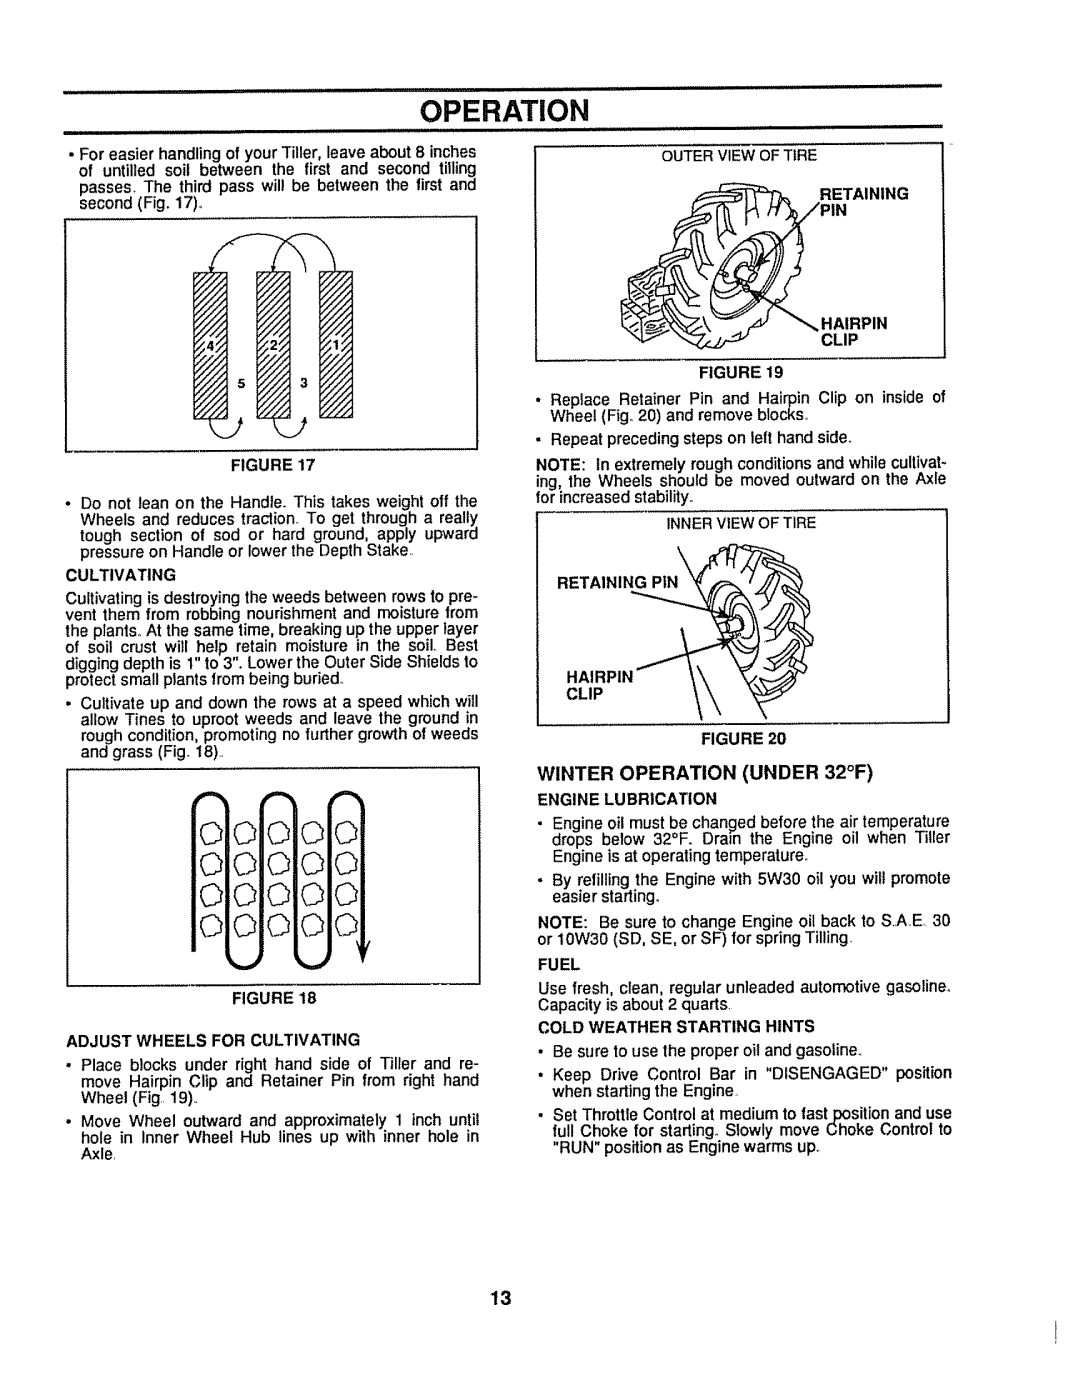 Sears 917.299642 Adjust Wheels for Cultivating, Retaini, Clip, Engine Lubrication, Fuel, Cold Weather Starting Hints 